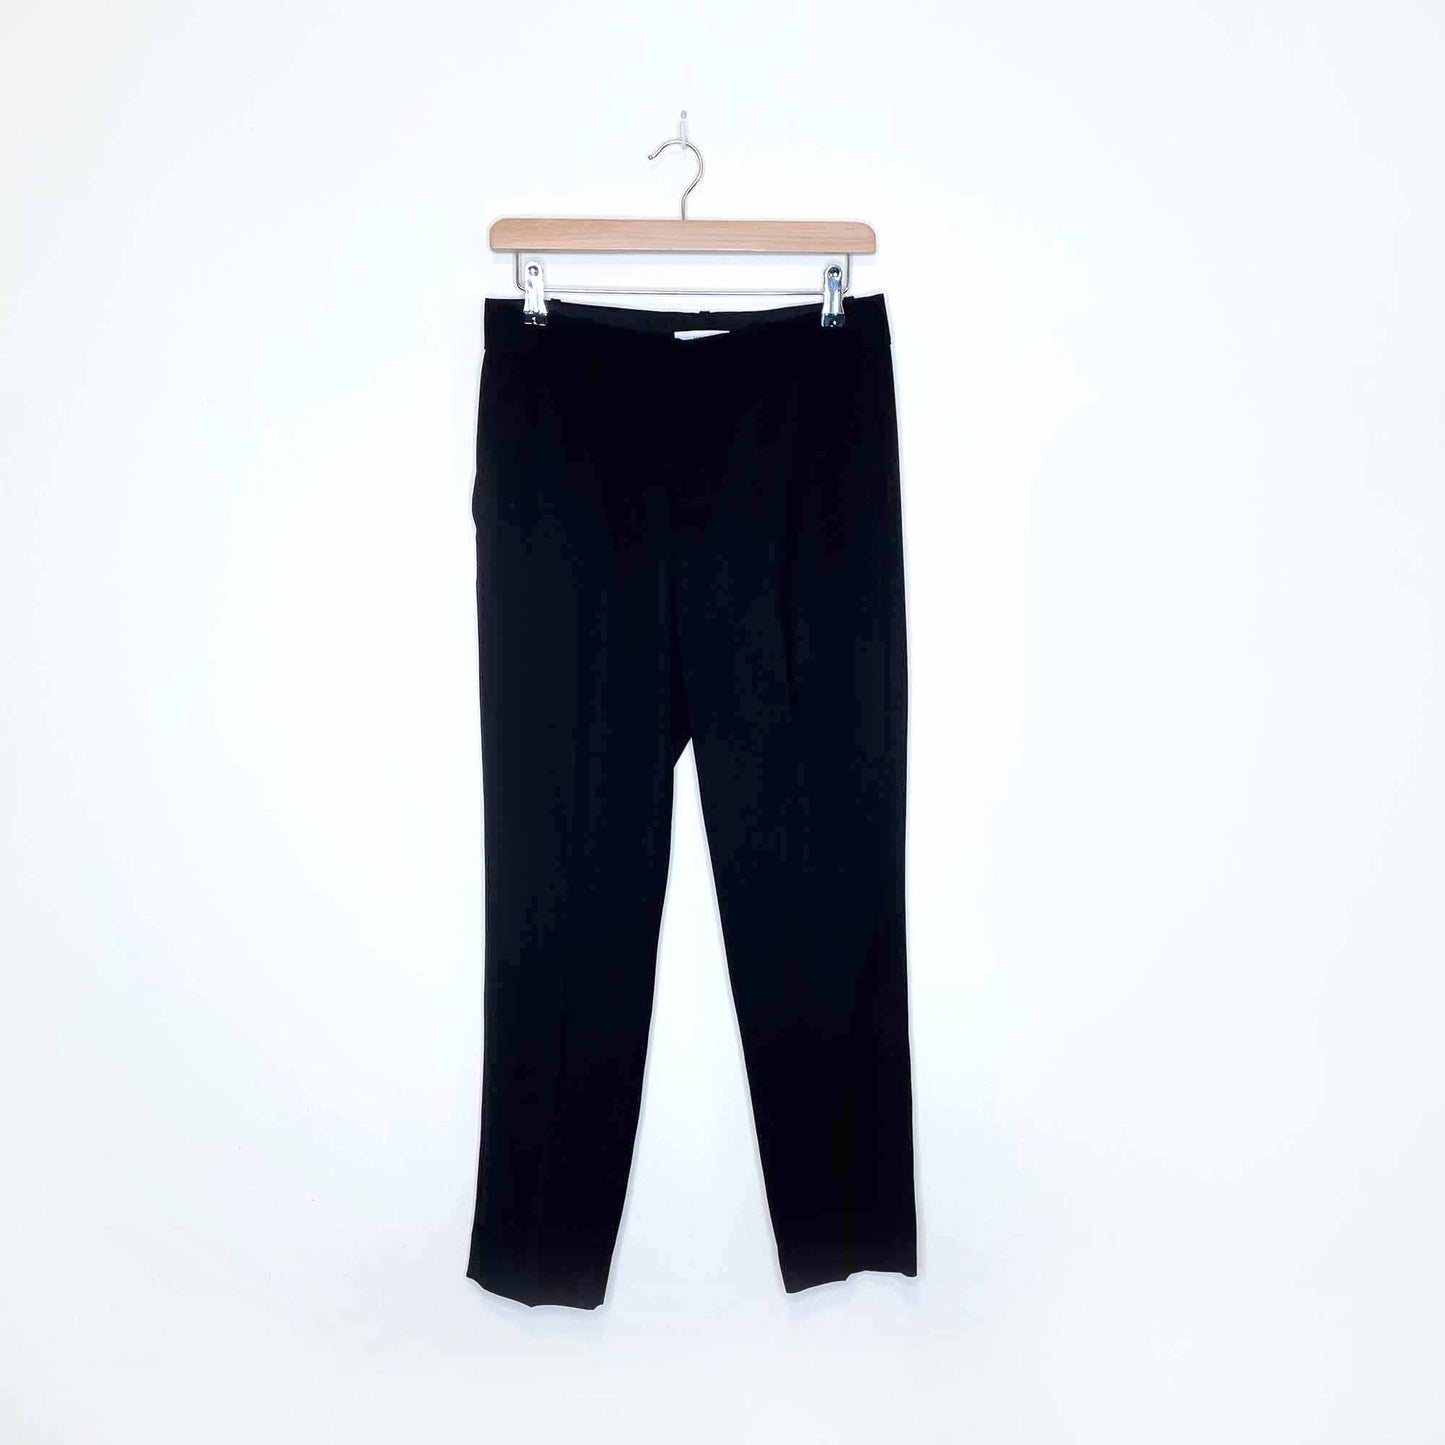 vince black tapered trousers in japanese crepe VR68621640 - size 4